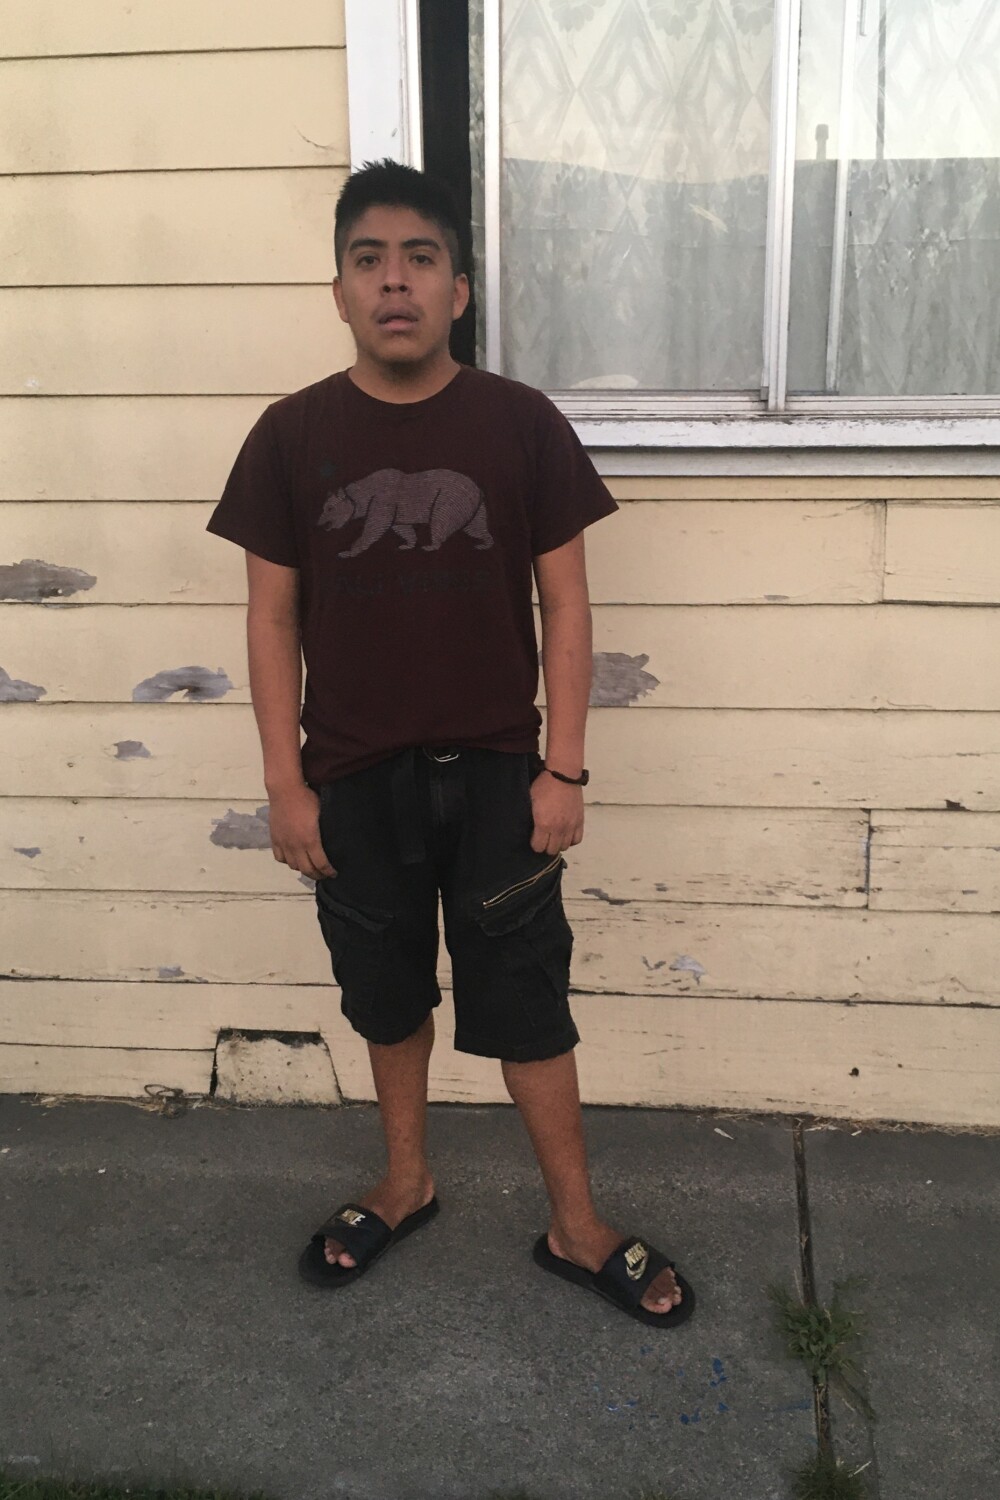 After police killing of a Zapotec man in Salinas, questions about a language barrier